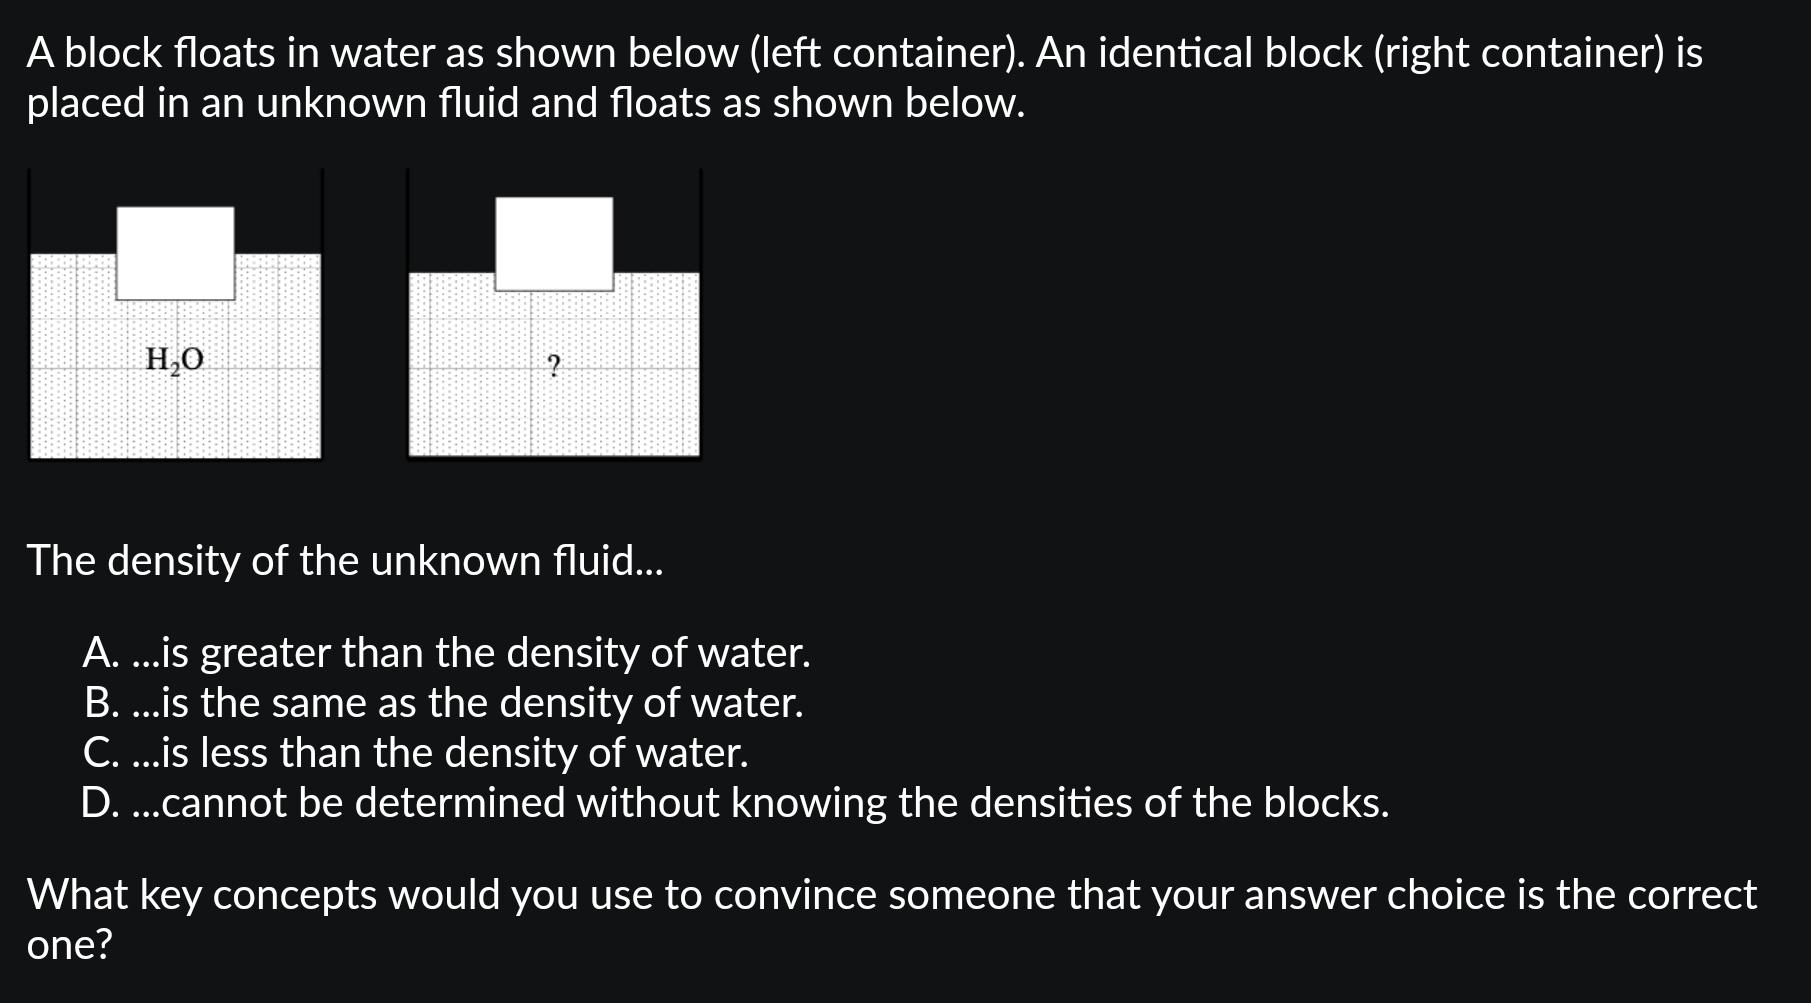 A block floats in water as shown below (left container). An identical block (right container) is placed in an